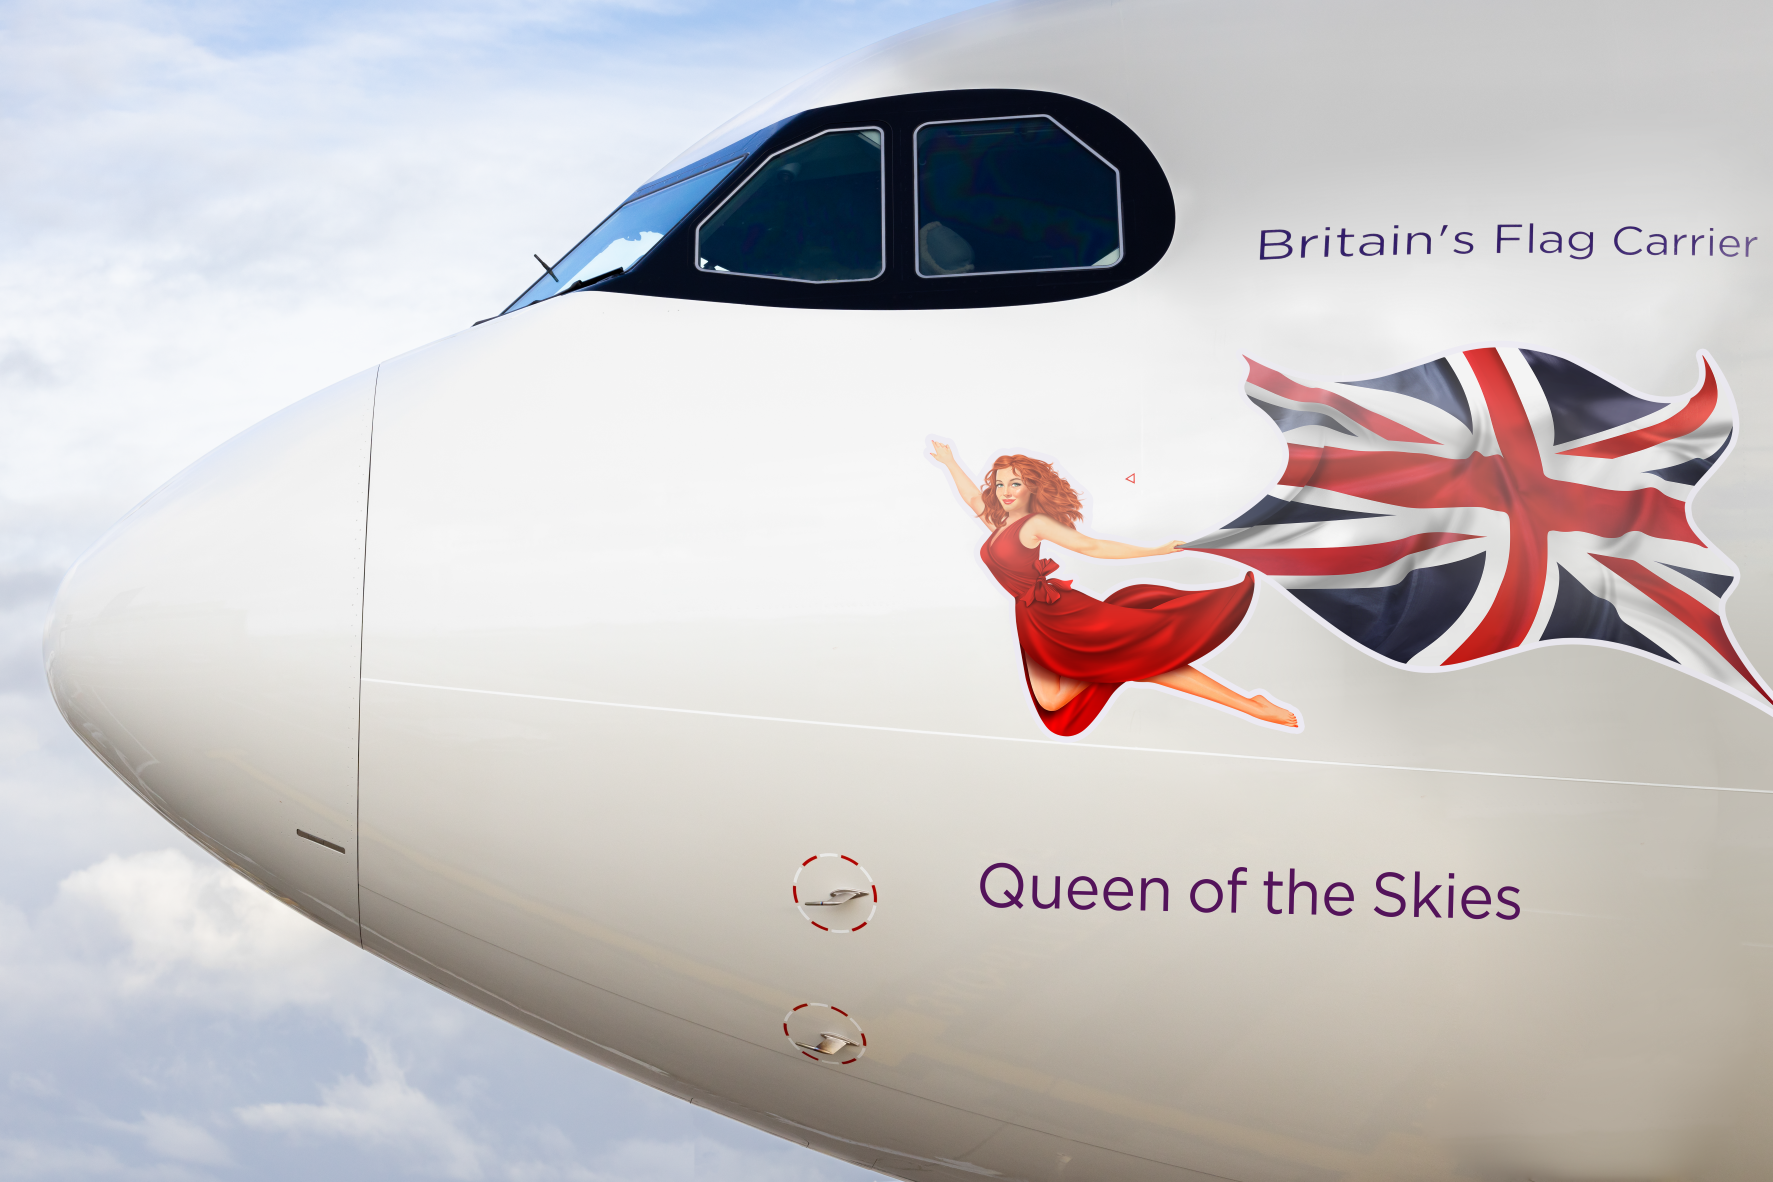 The flying mascot on Virgin Atlantic's Queen of the Skies Airbus A330neo aircraft